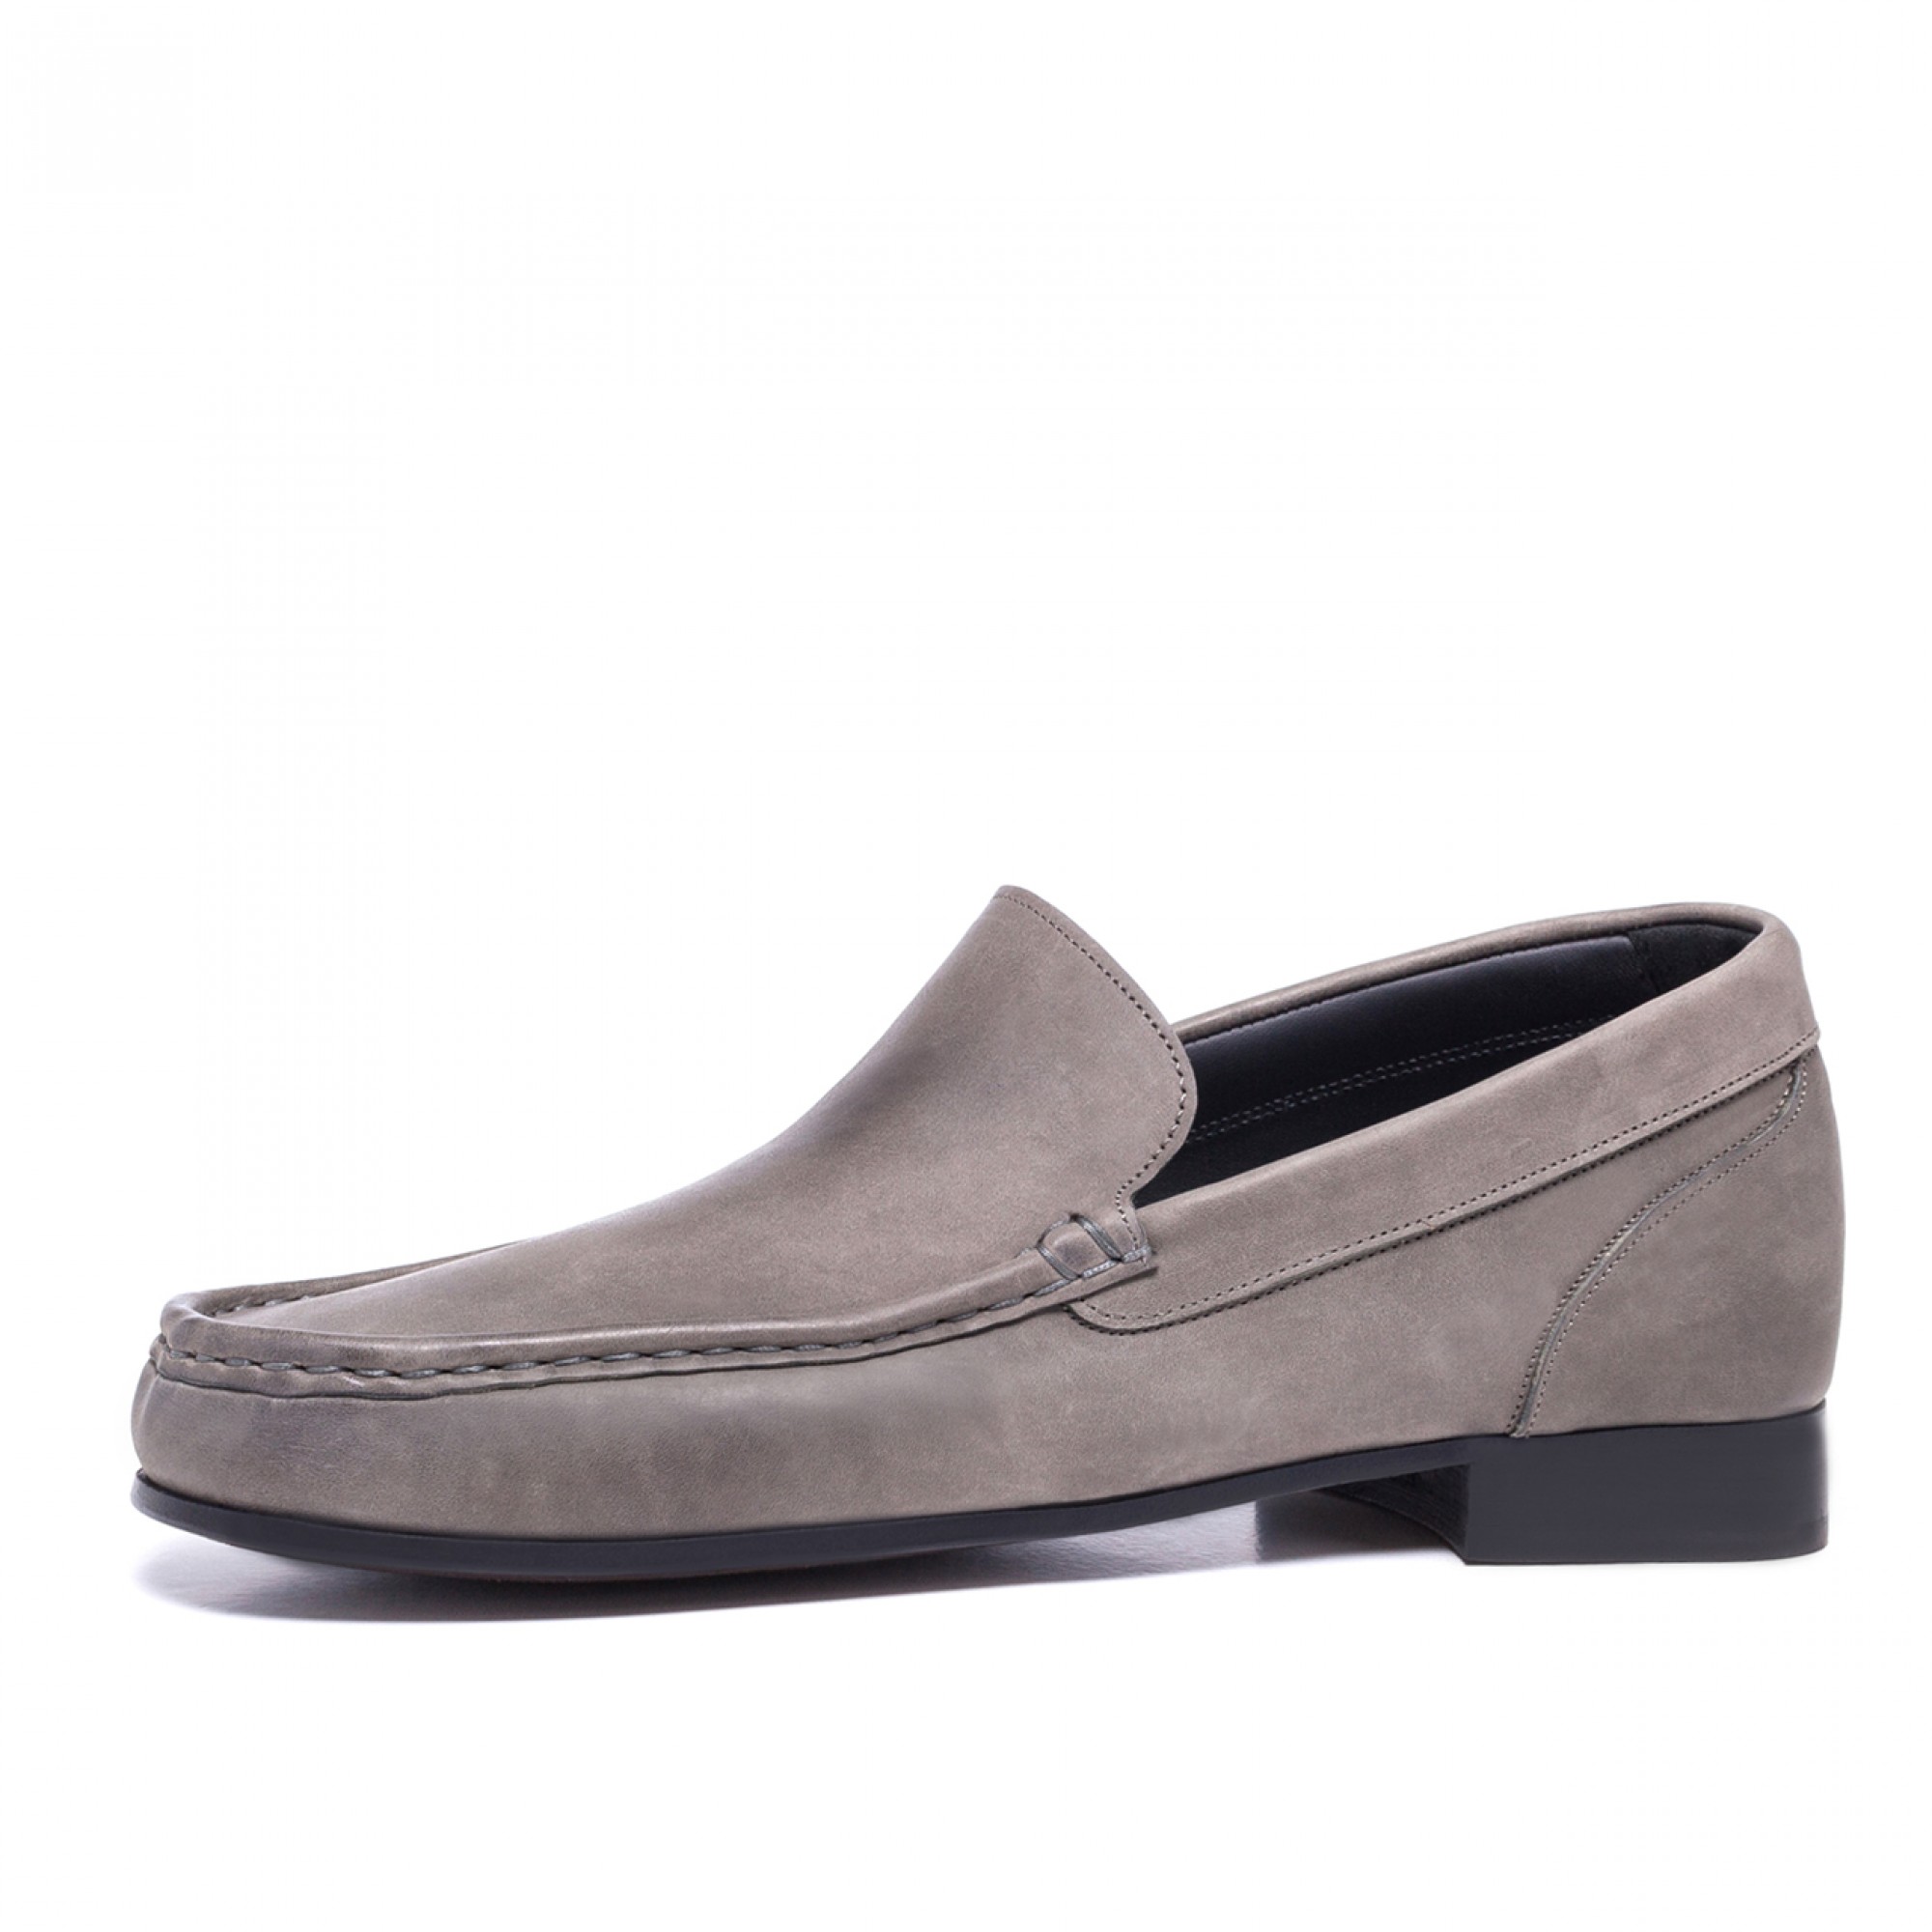 Casablanca - Elevator Loafers in Leather plus up to 2.6 inches